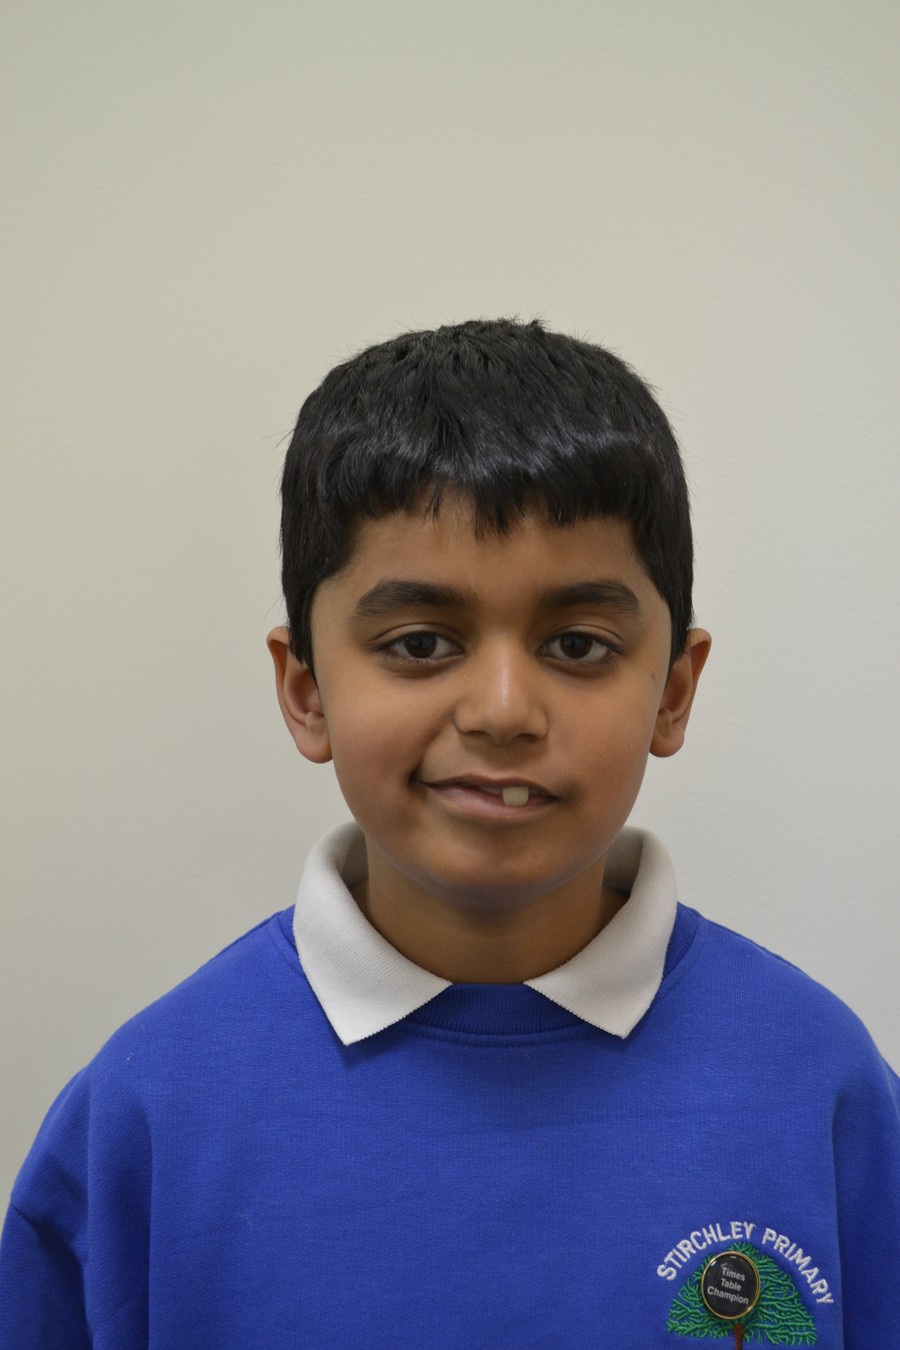 Well done Mohammed!